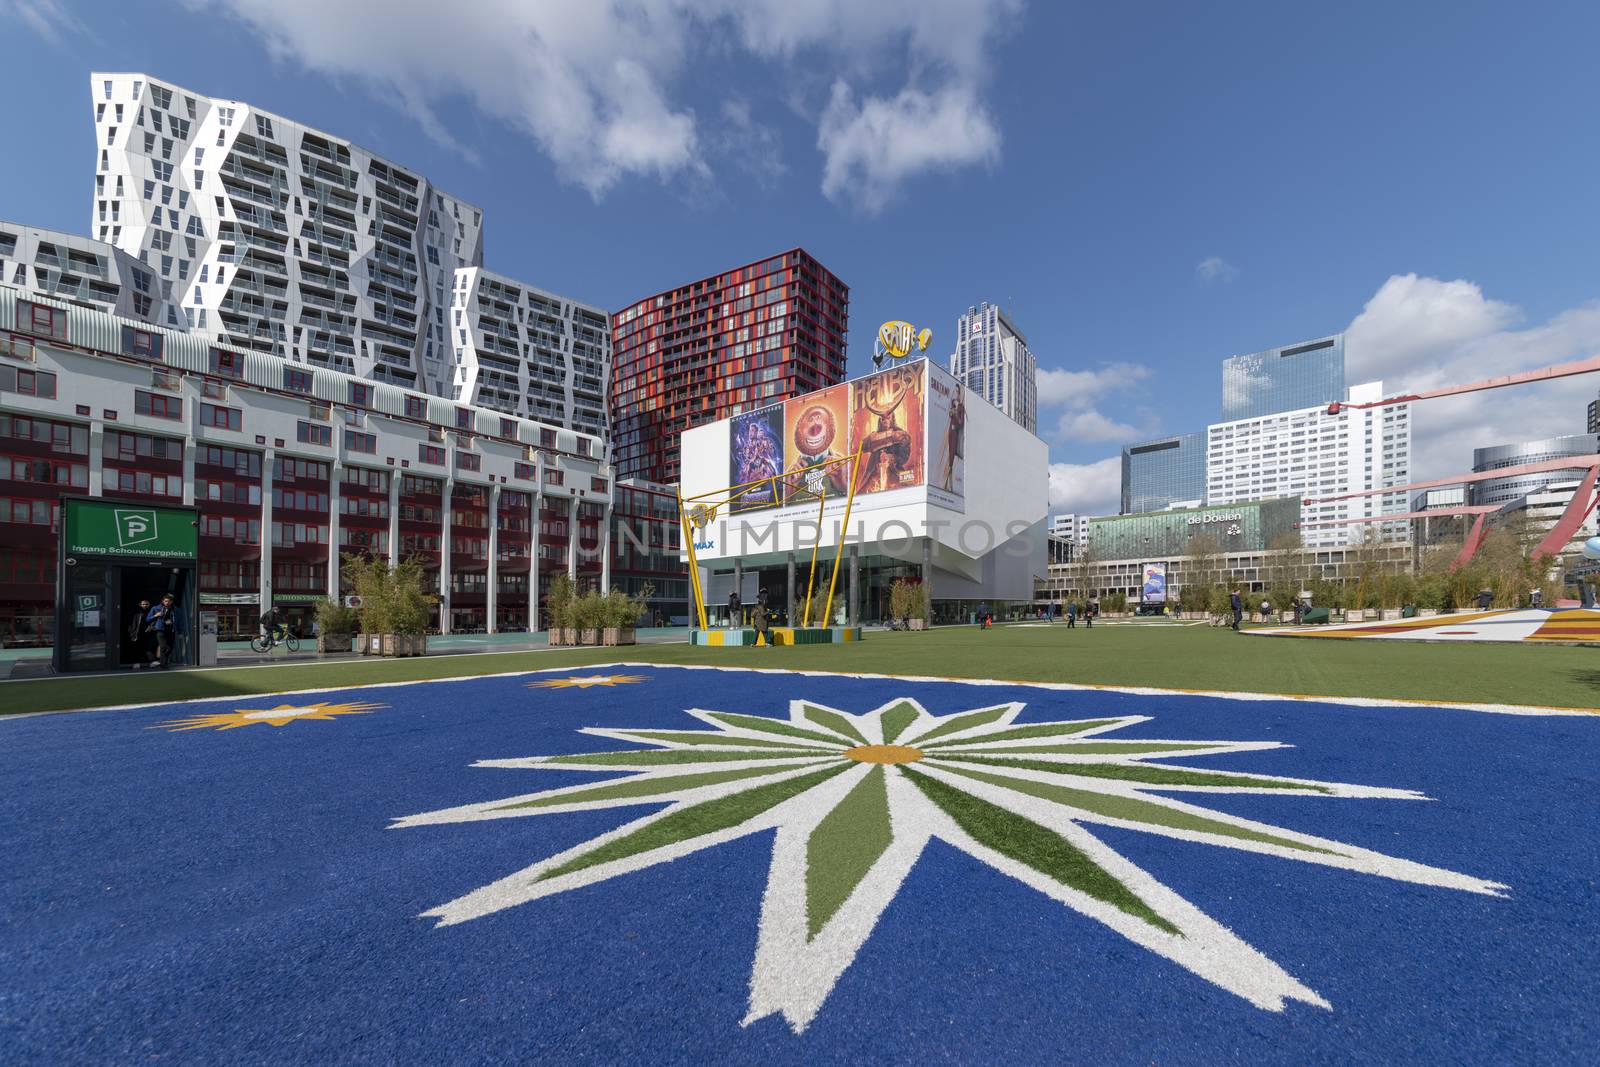 ROTTERDAM, 13 April 2019 - Central place of the cinema building in Rotterdam with the ground decorated with face colored grass depicting a twelve branched star by ankorlight